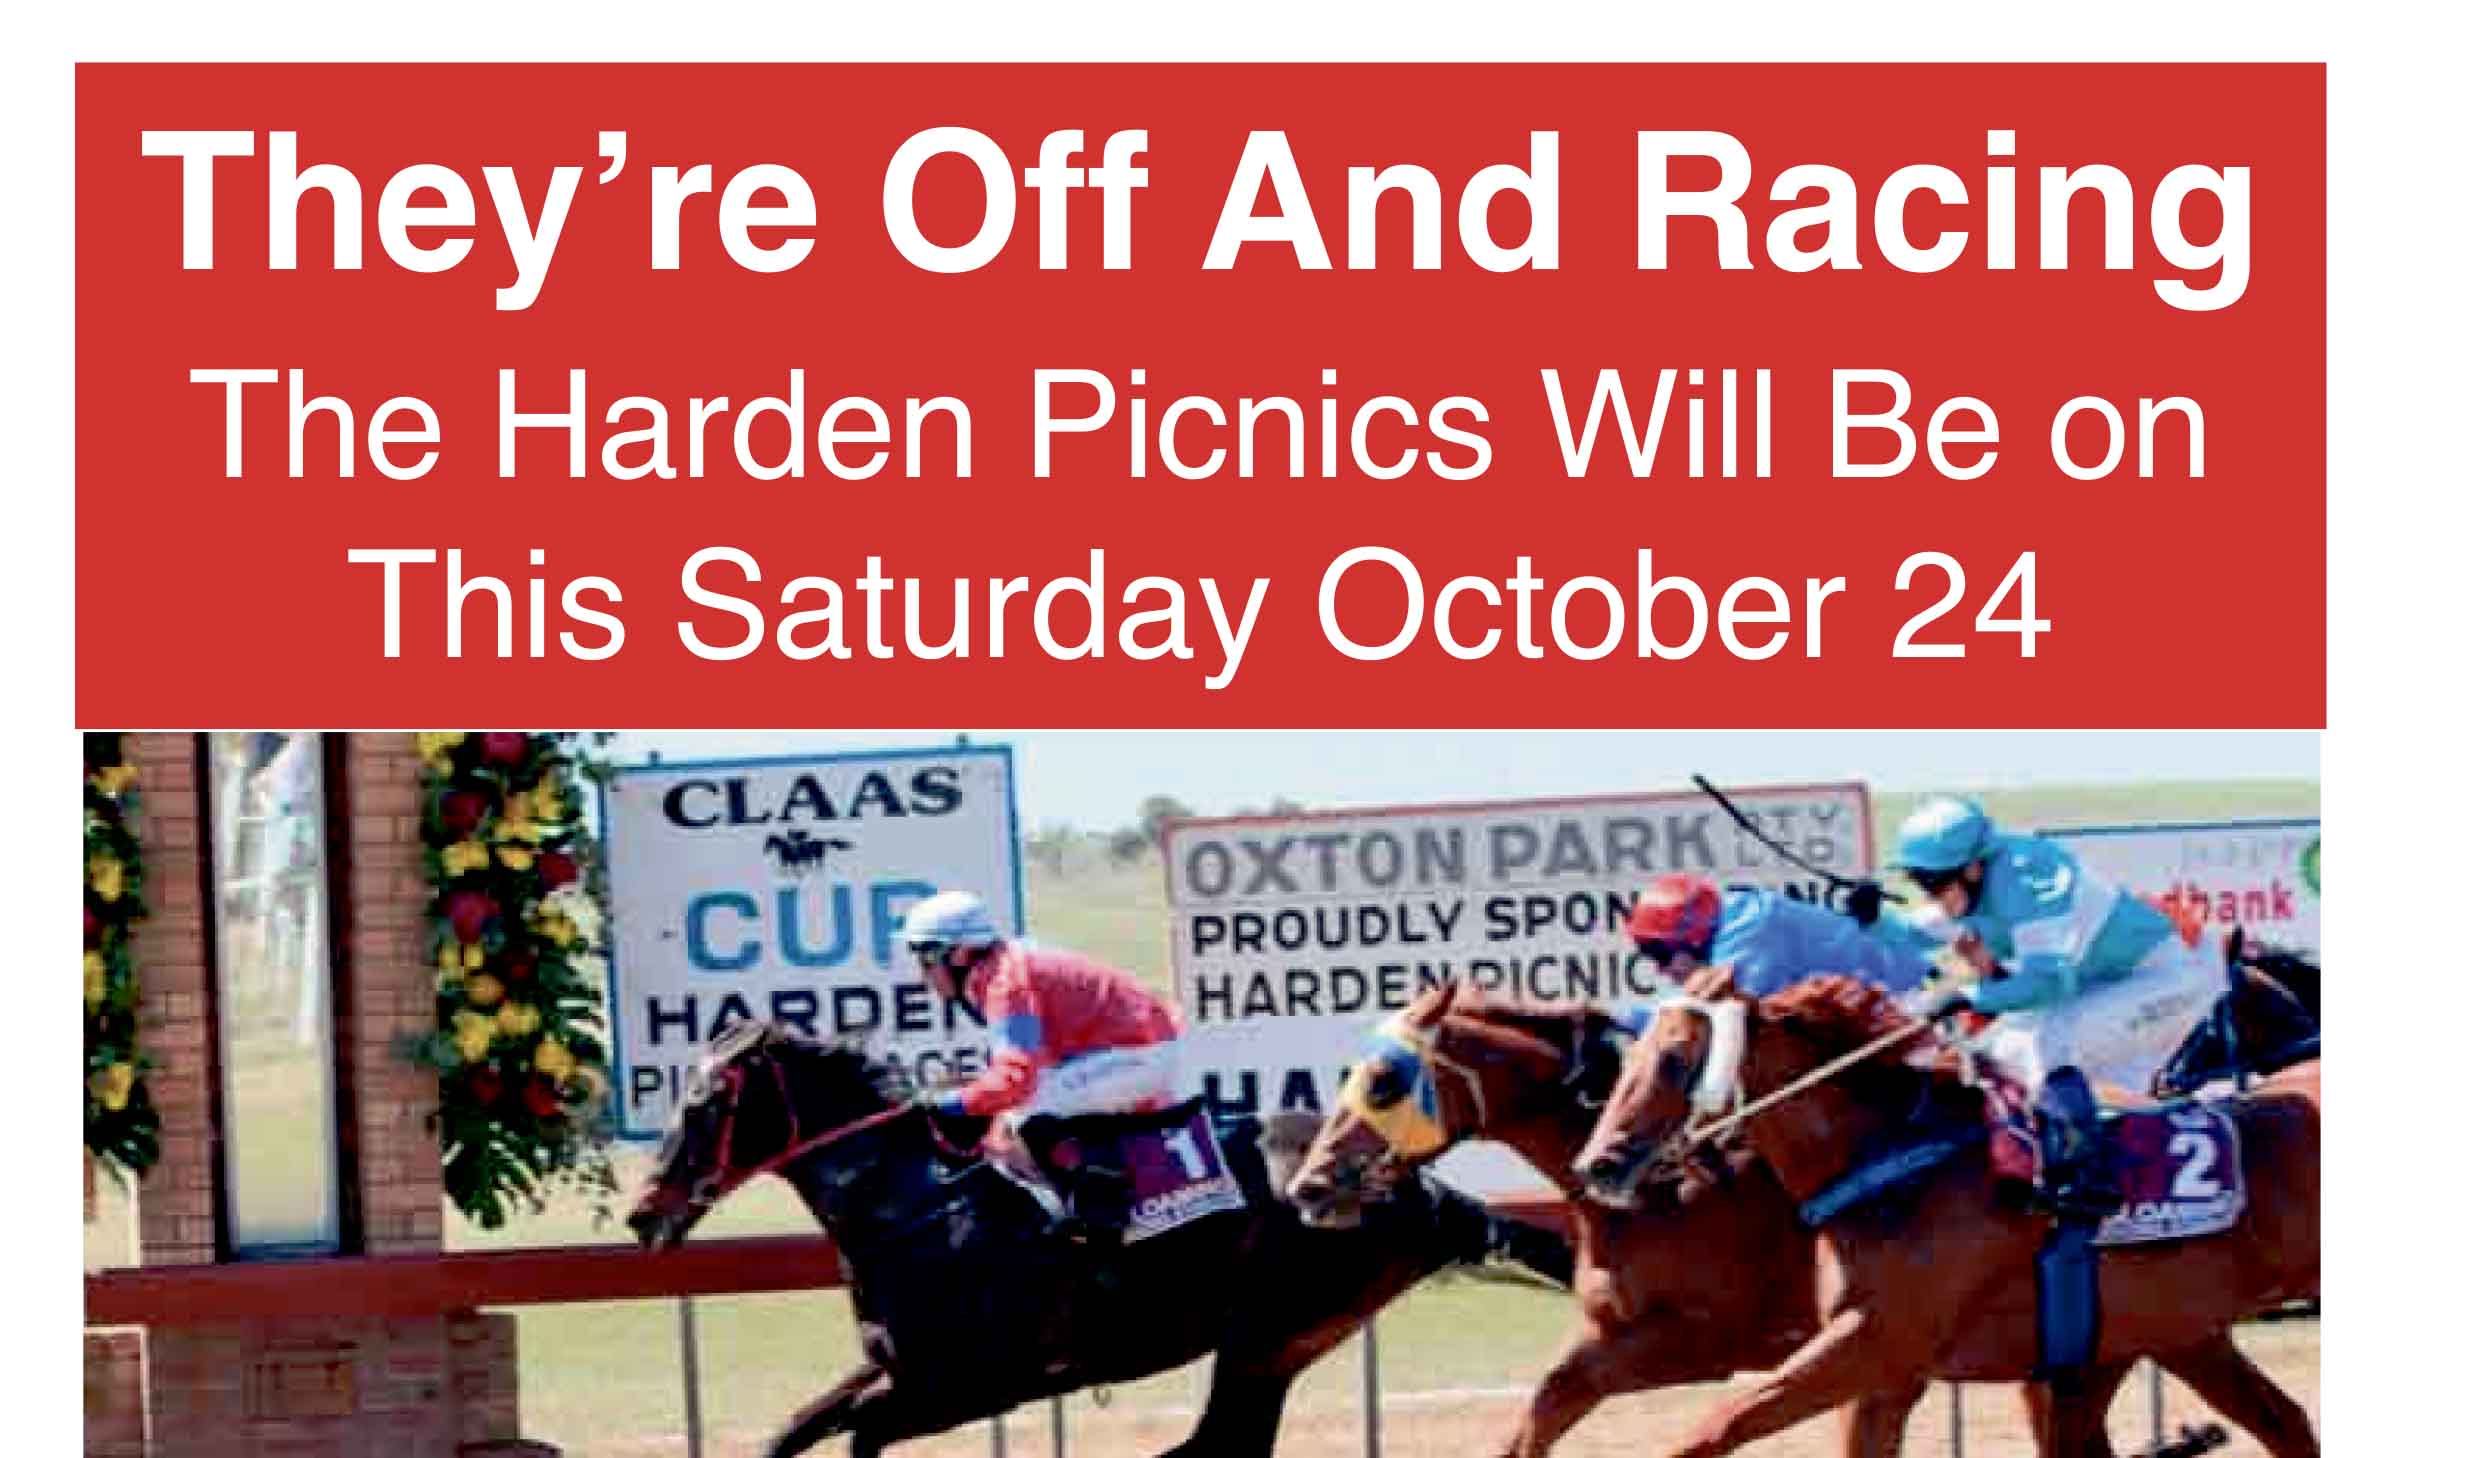 They’re Off And Racing Harden Picnics They’re Off And Racing. The Harden Picnics Will Be on This Saturday October 24